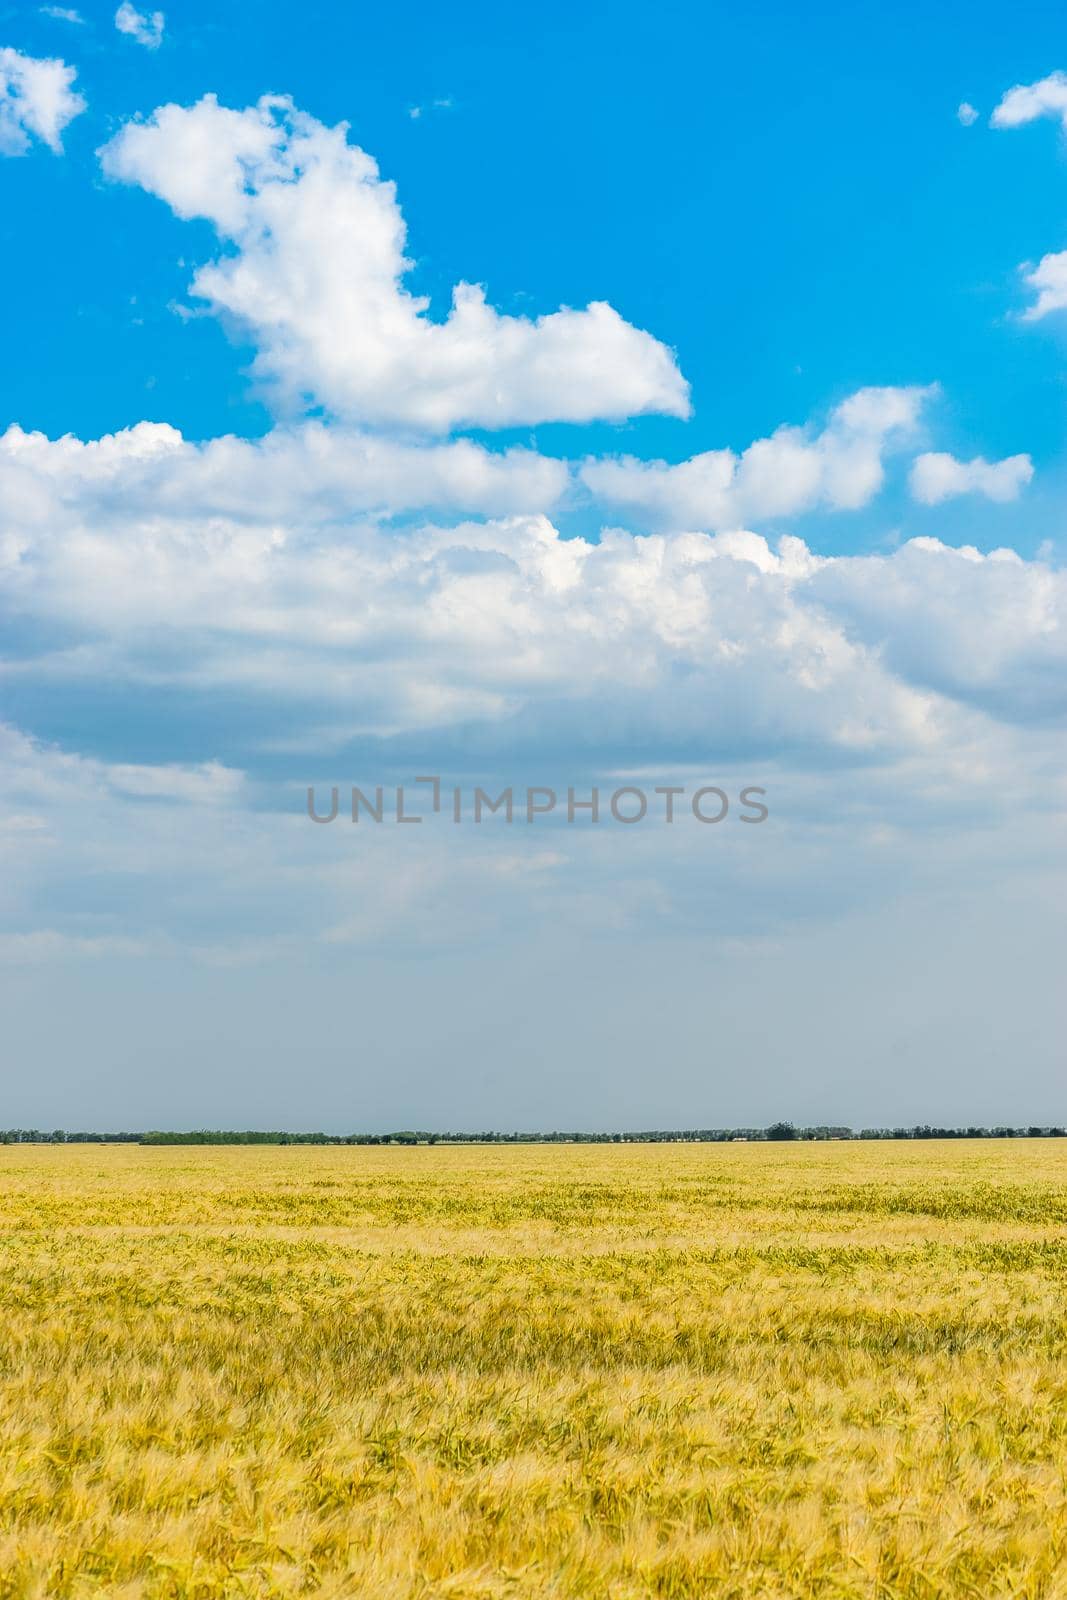 Natural landscape with yellow wheat field under blue sky with clouds.